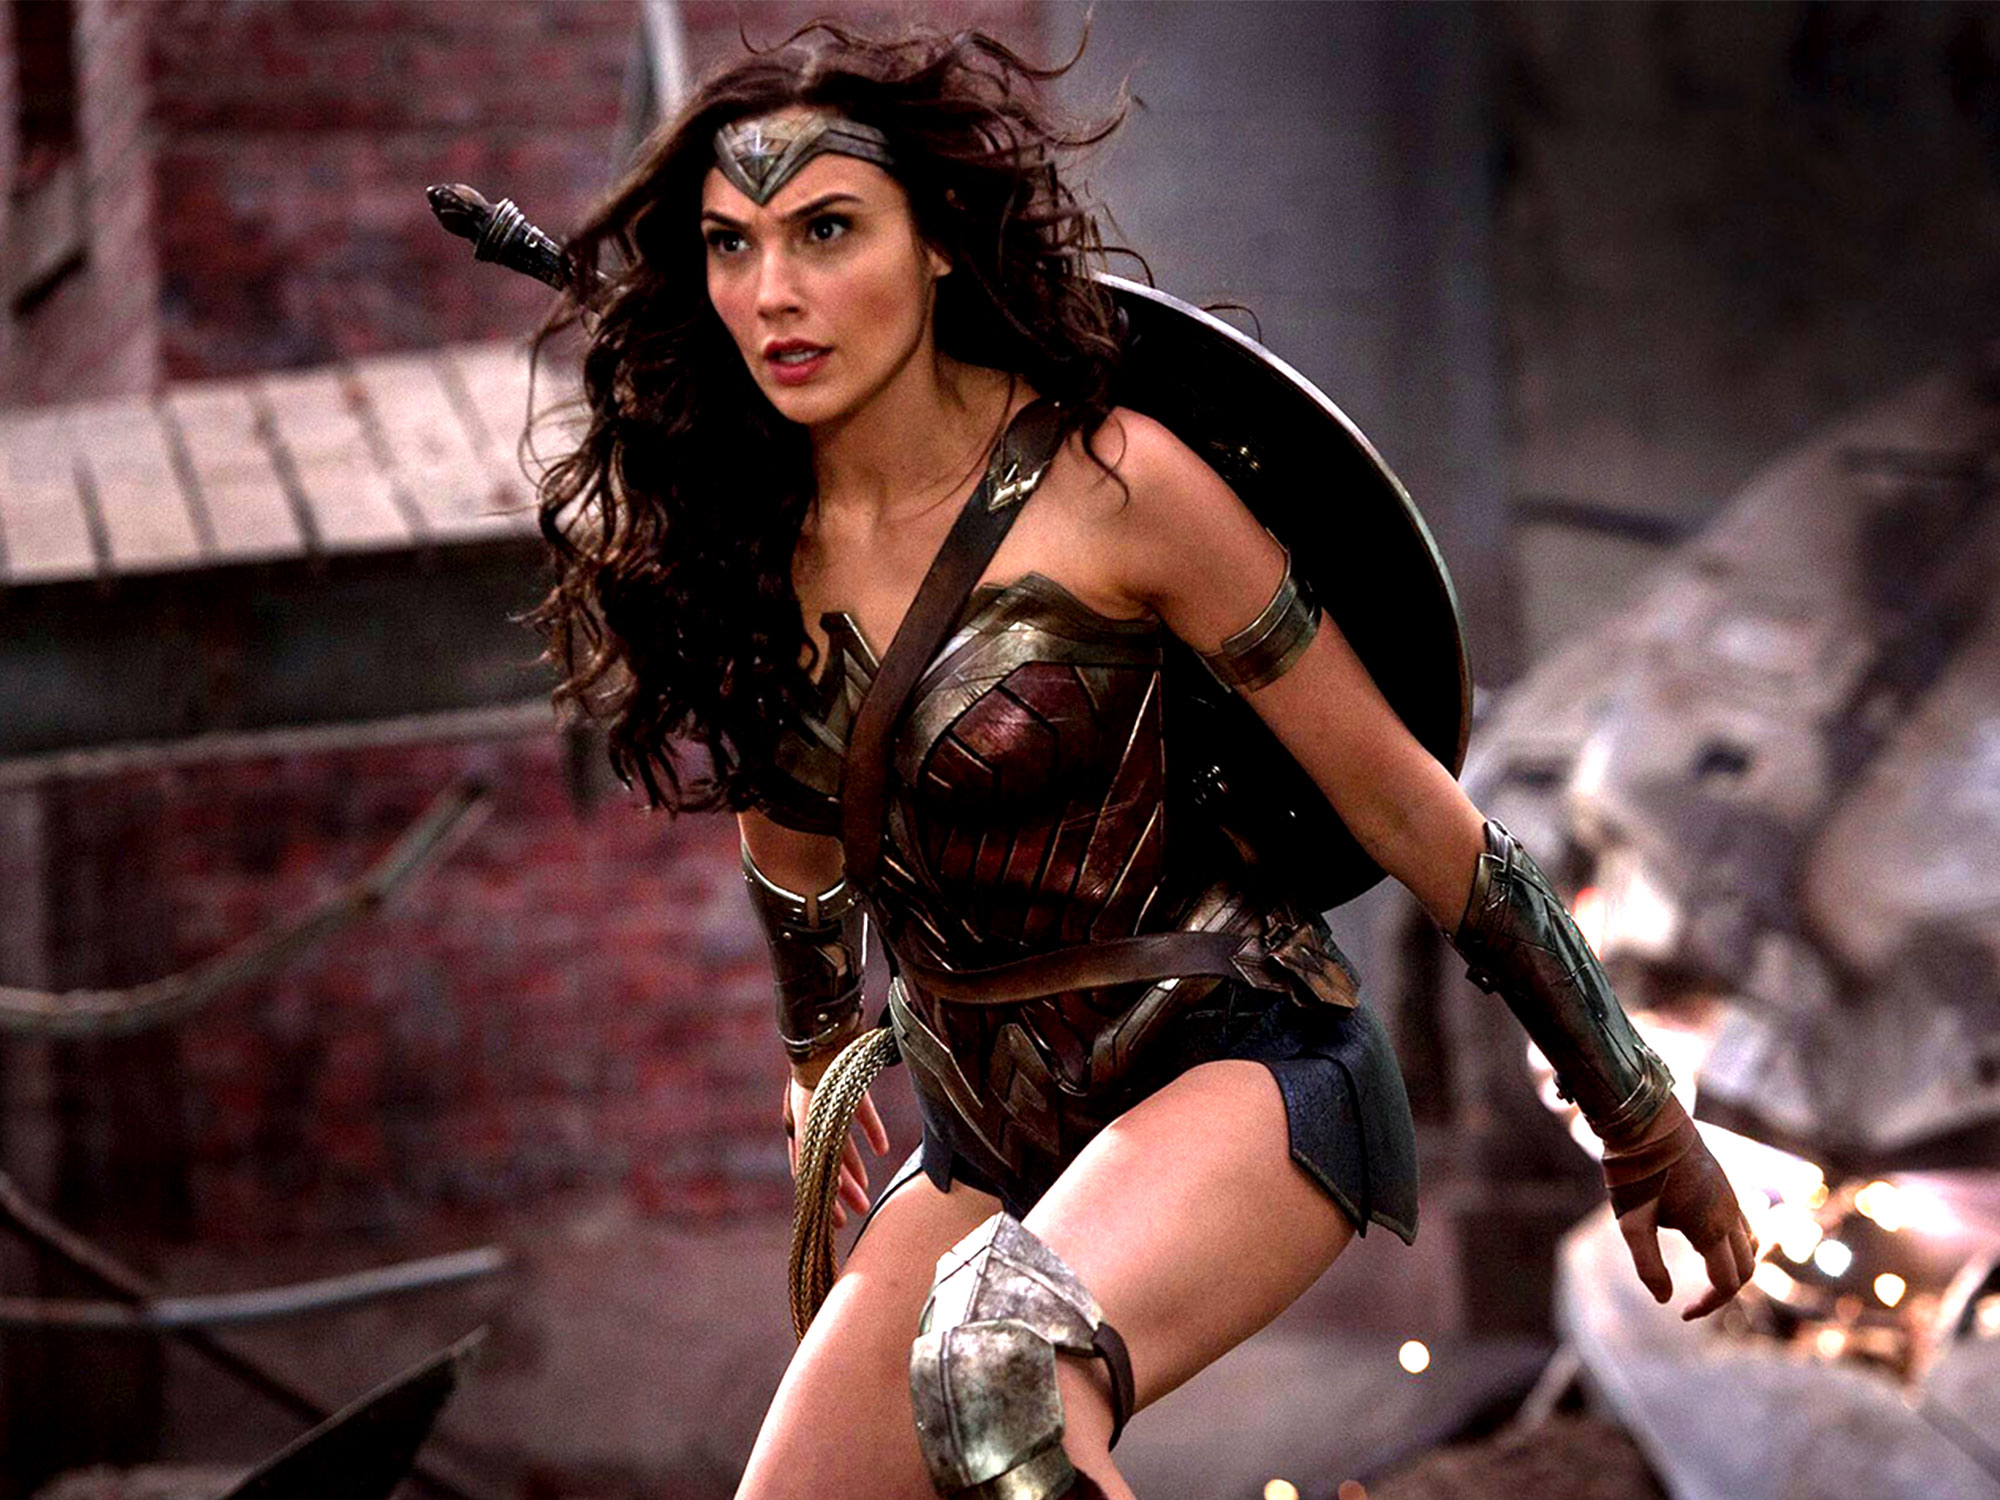 Wonder Woman review - 'Gal Gadot carries the film with ease' .